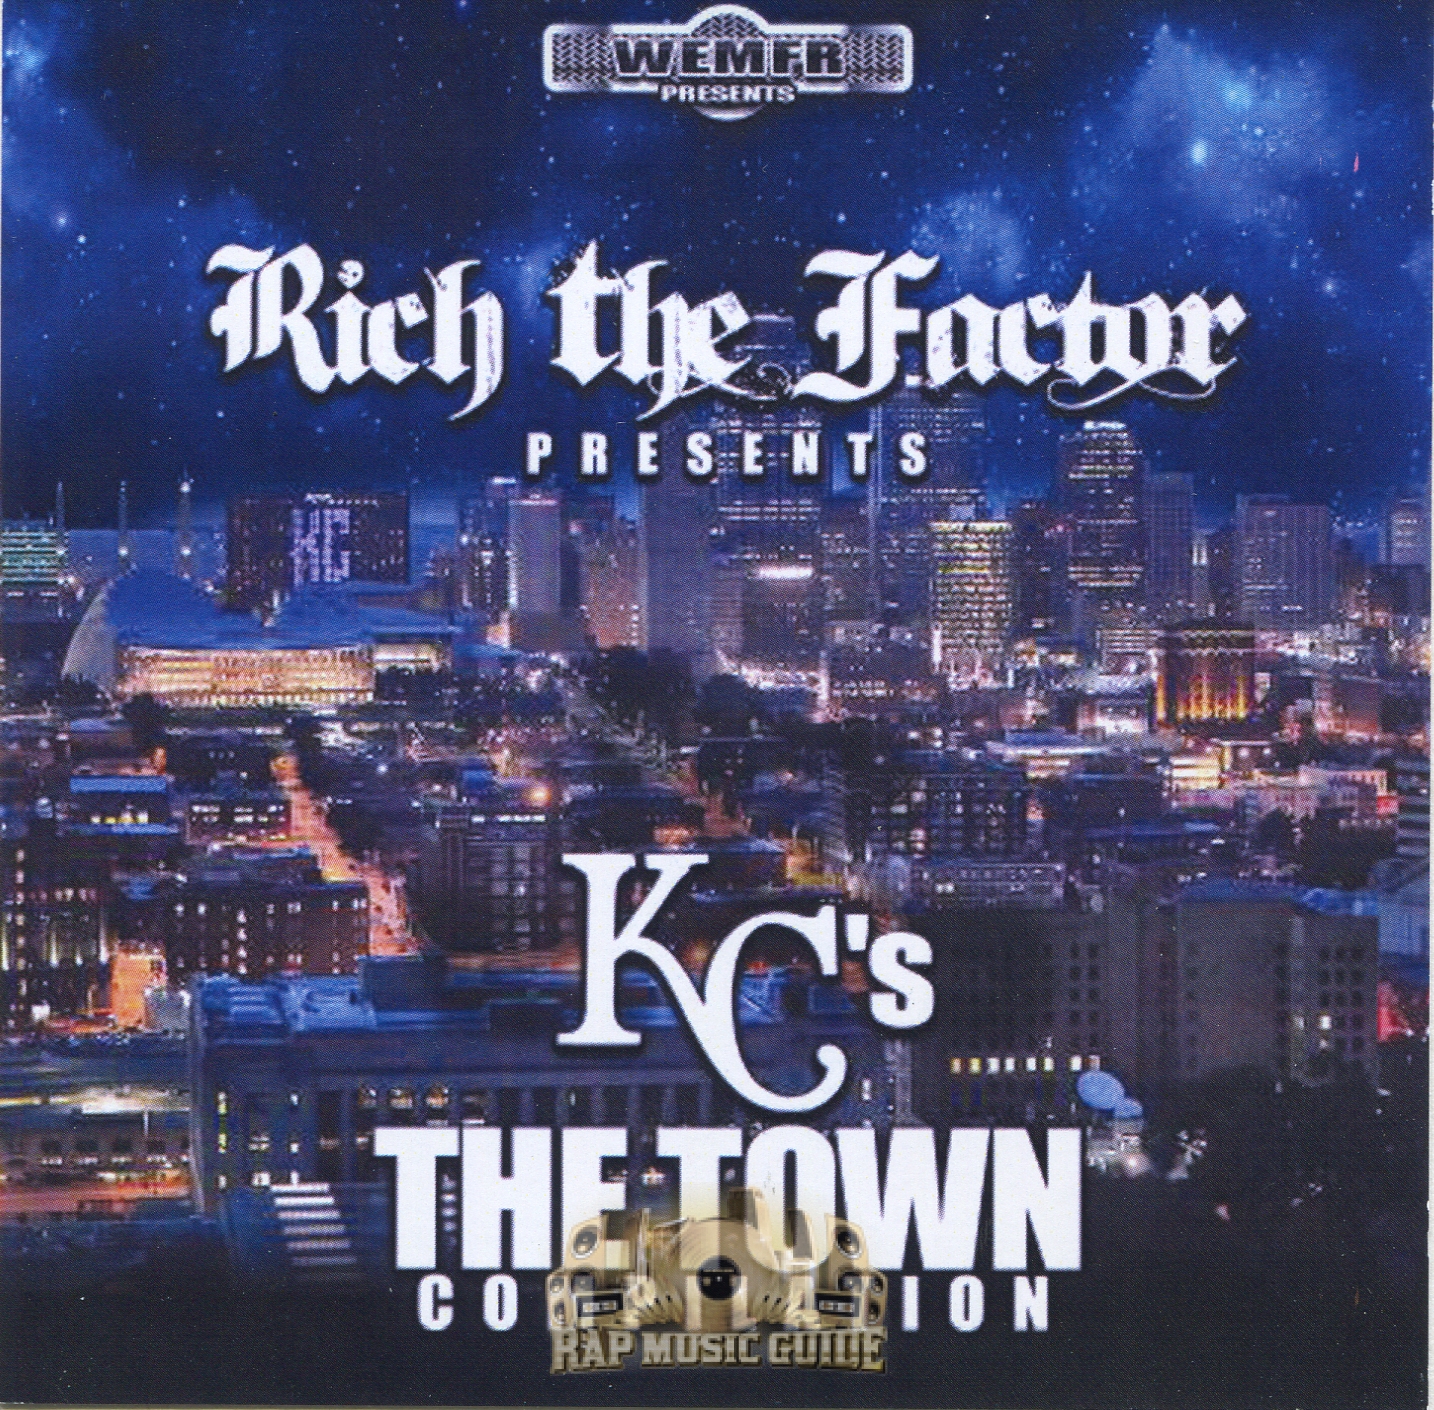 Rich The Factor - KC's The Town Compilation: CD | Rap Music Guide